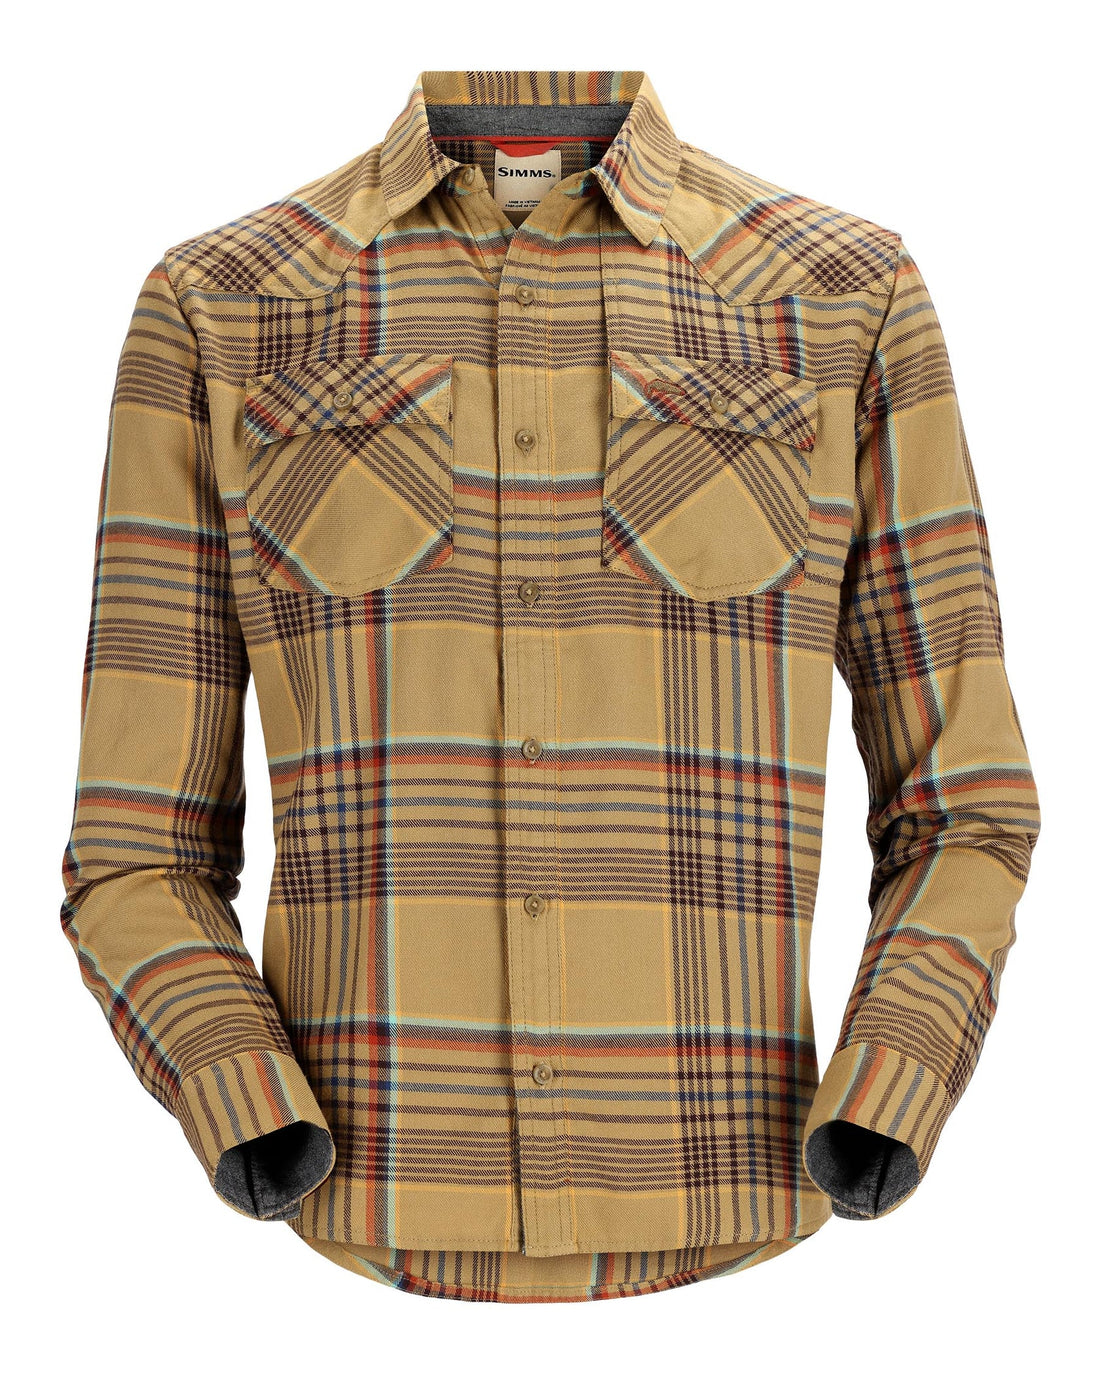 Simms Men's Santee Flannel - Camel/Navy/Clay Neo Plaid